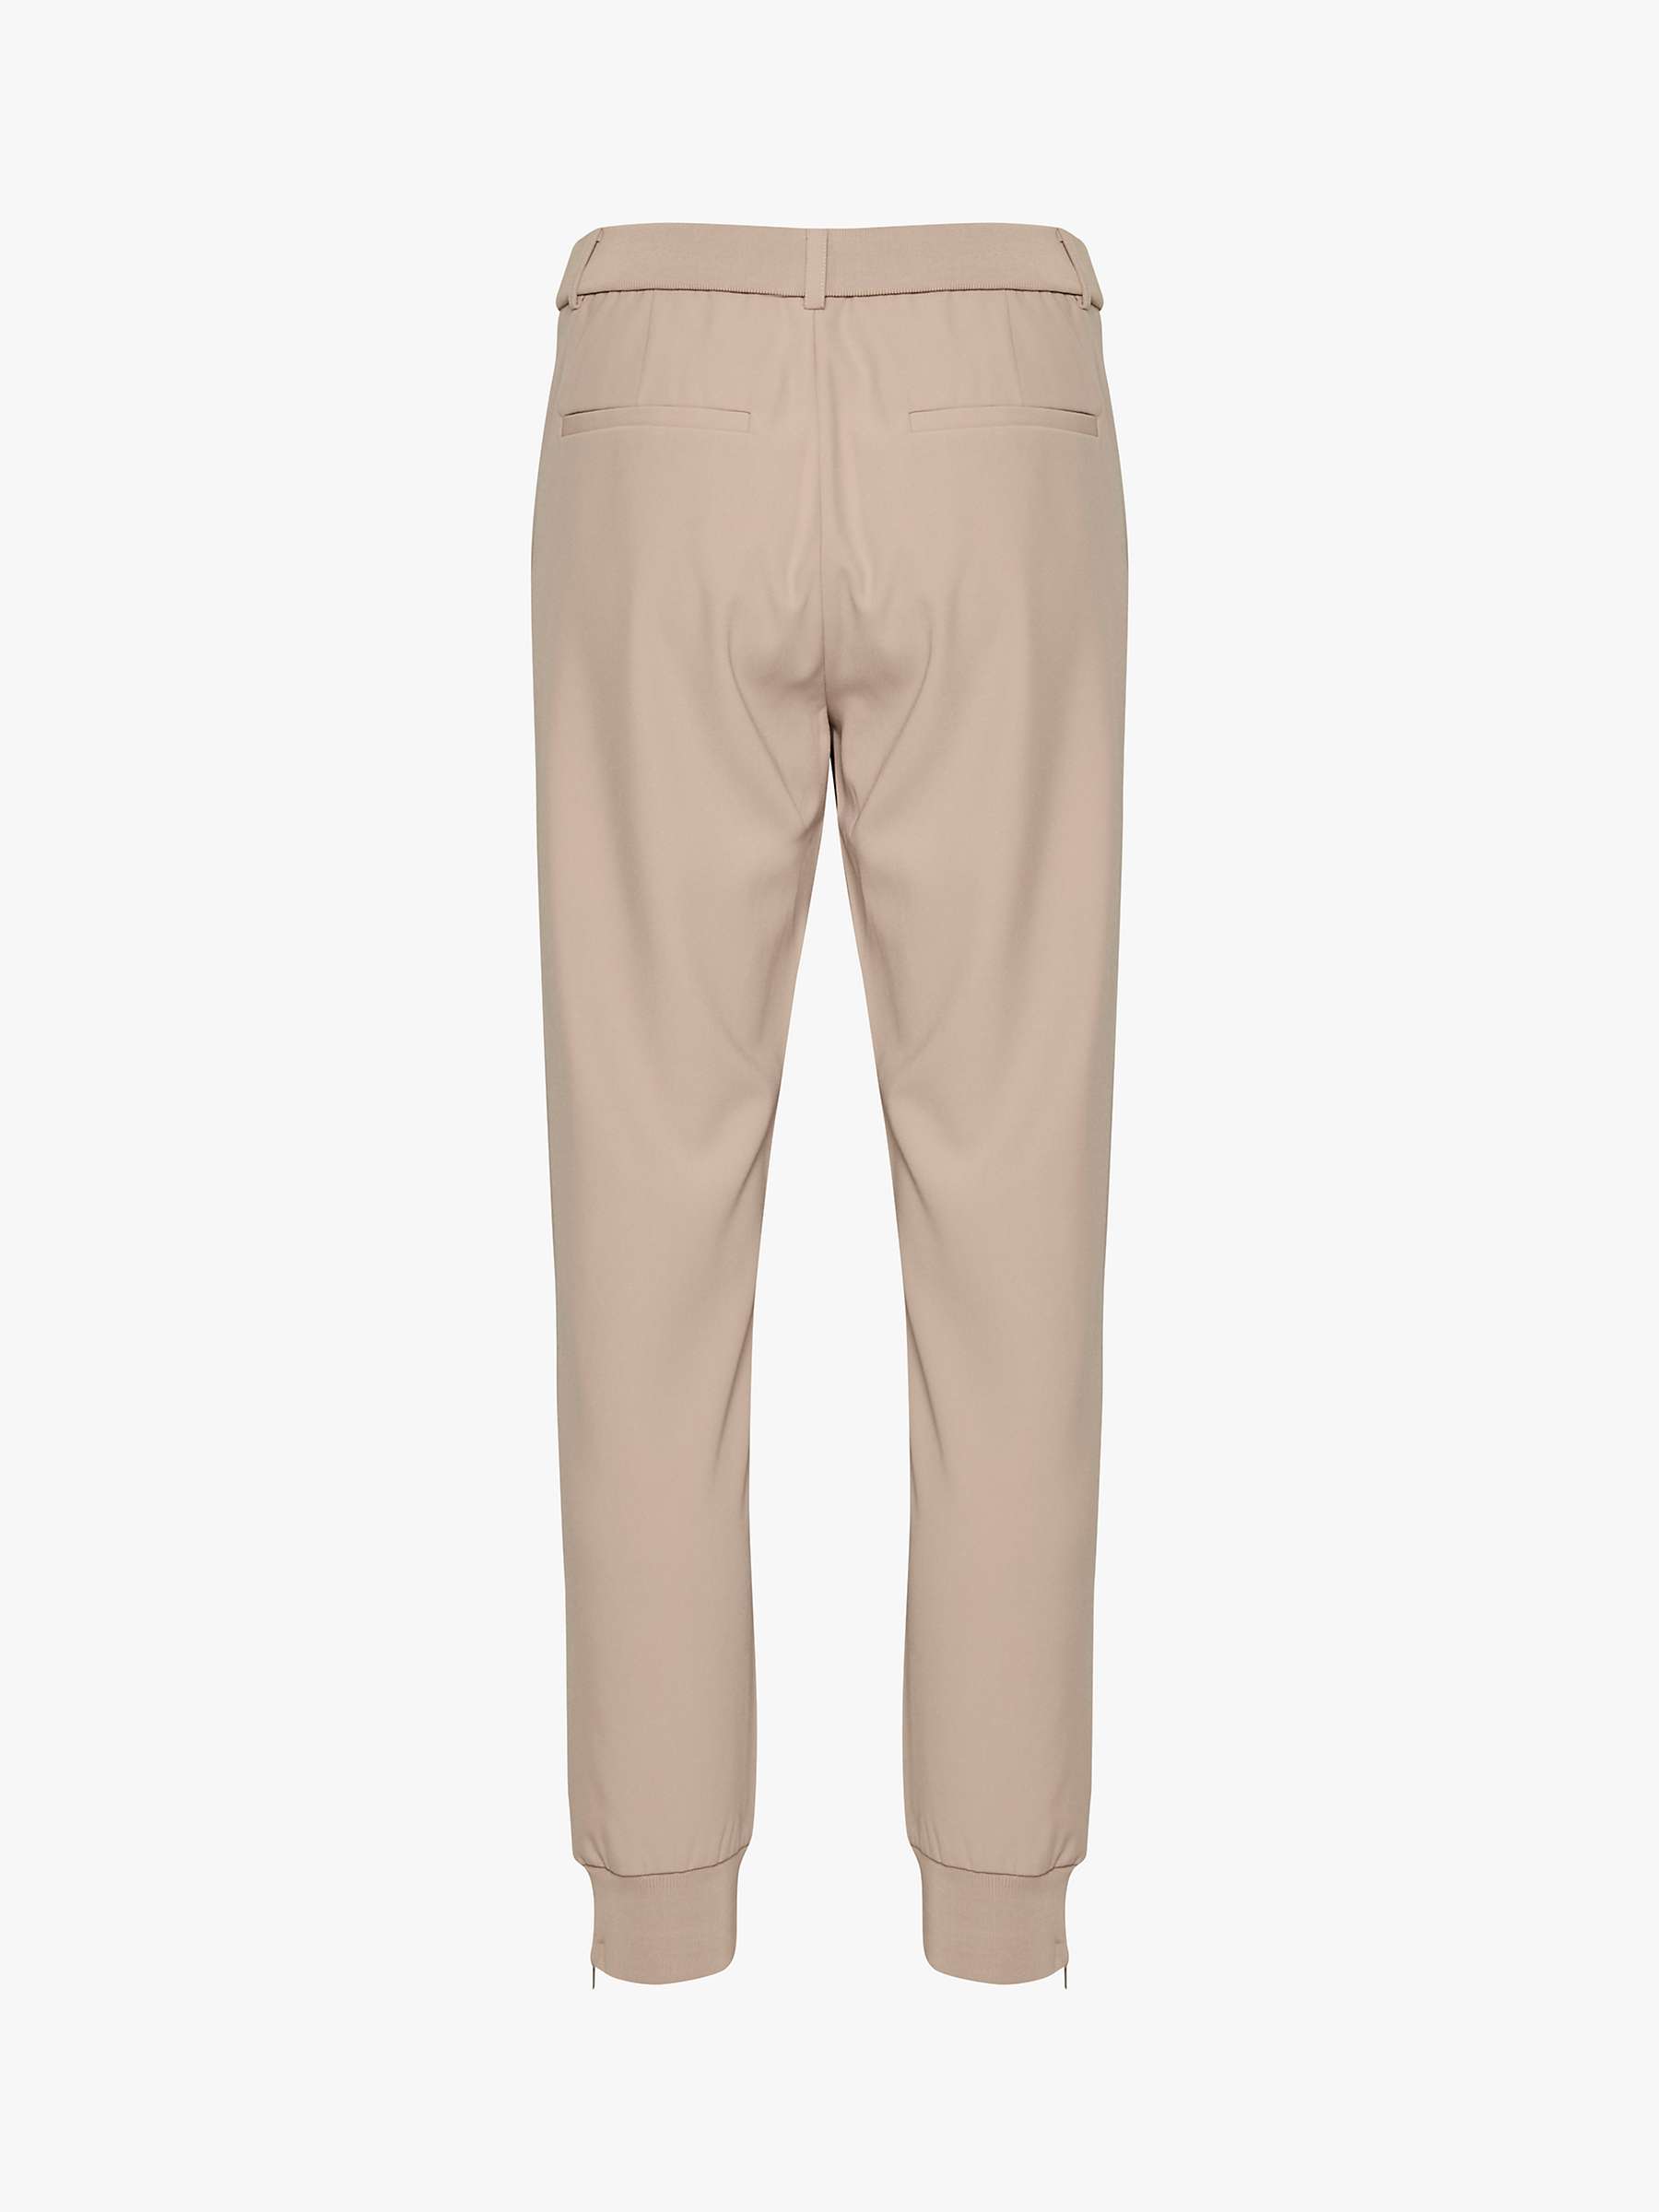 Buy InWear Nica Suit Trousers Online at johnlewis.com